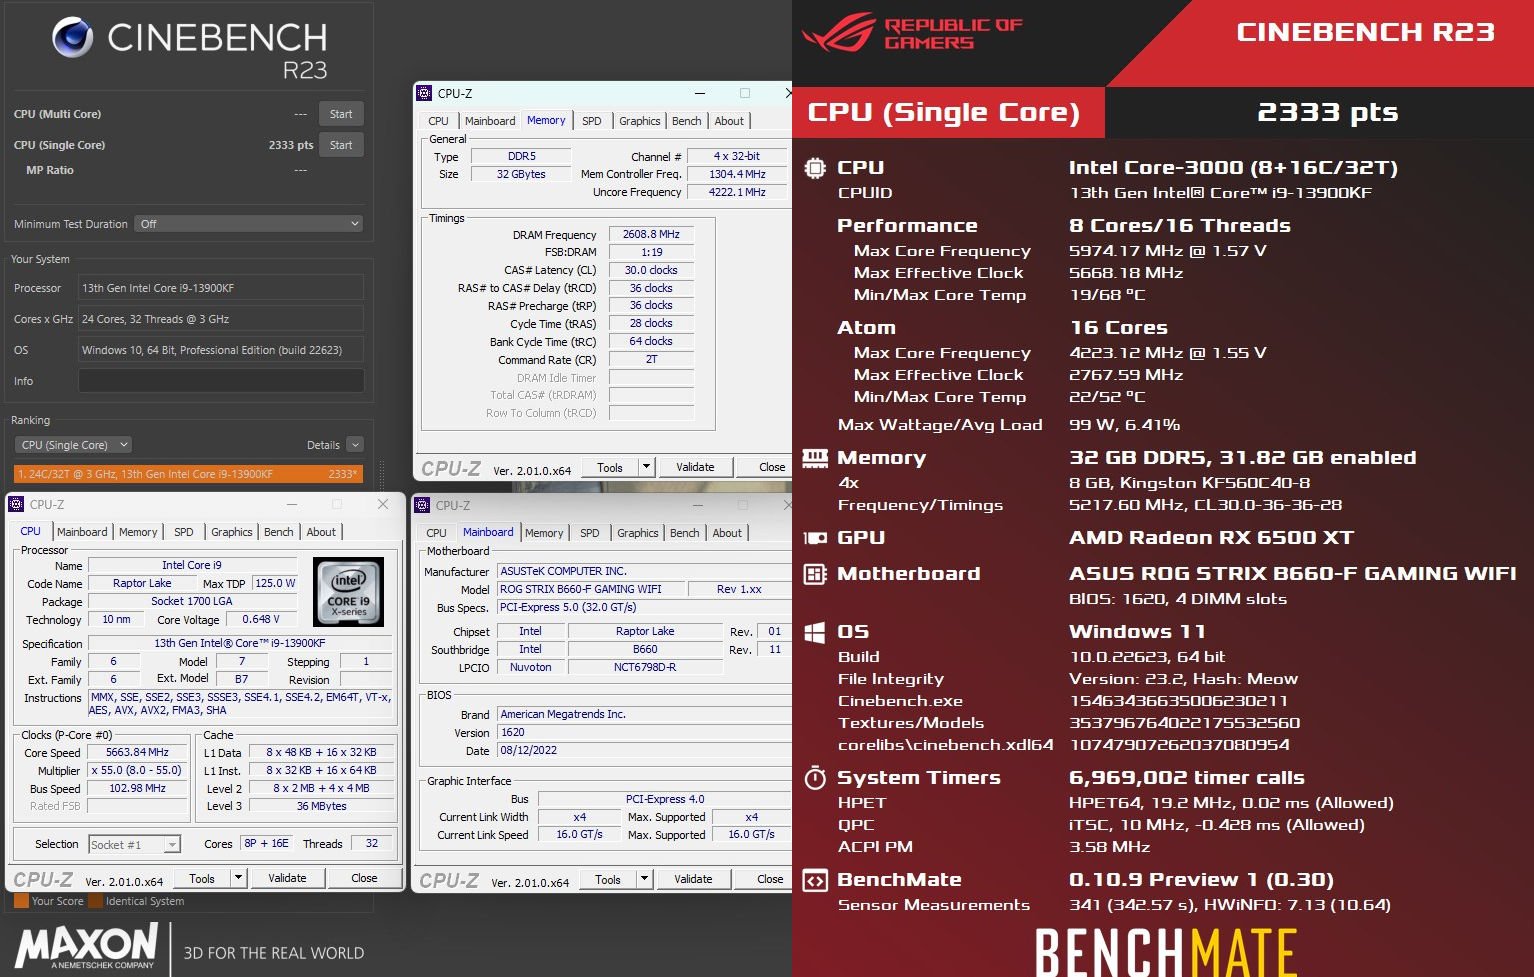 Intel Core i9-13900KF managed to overclock to 5.97 GHz on a mid-range motherboard